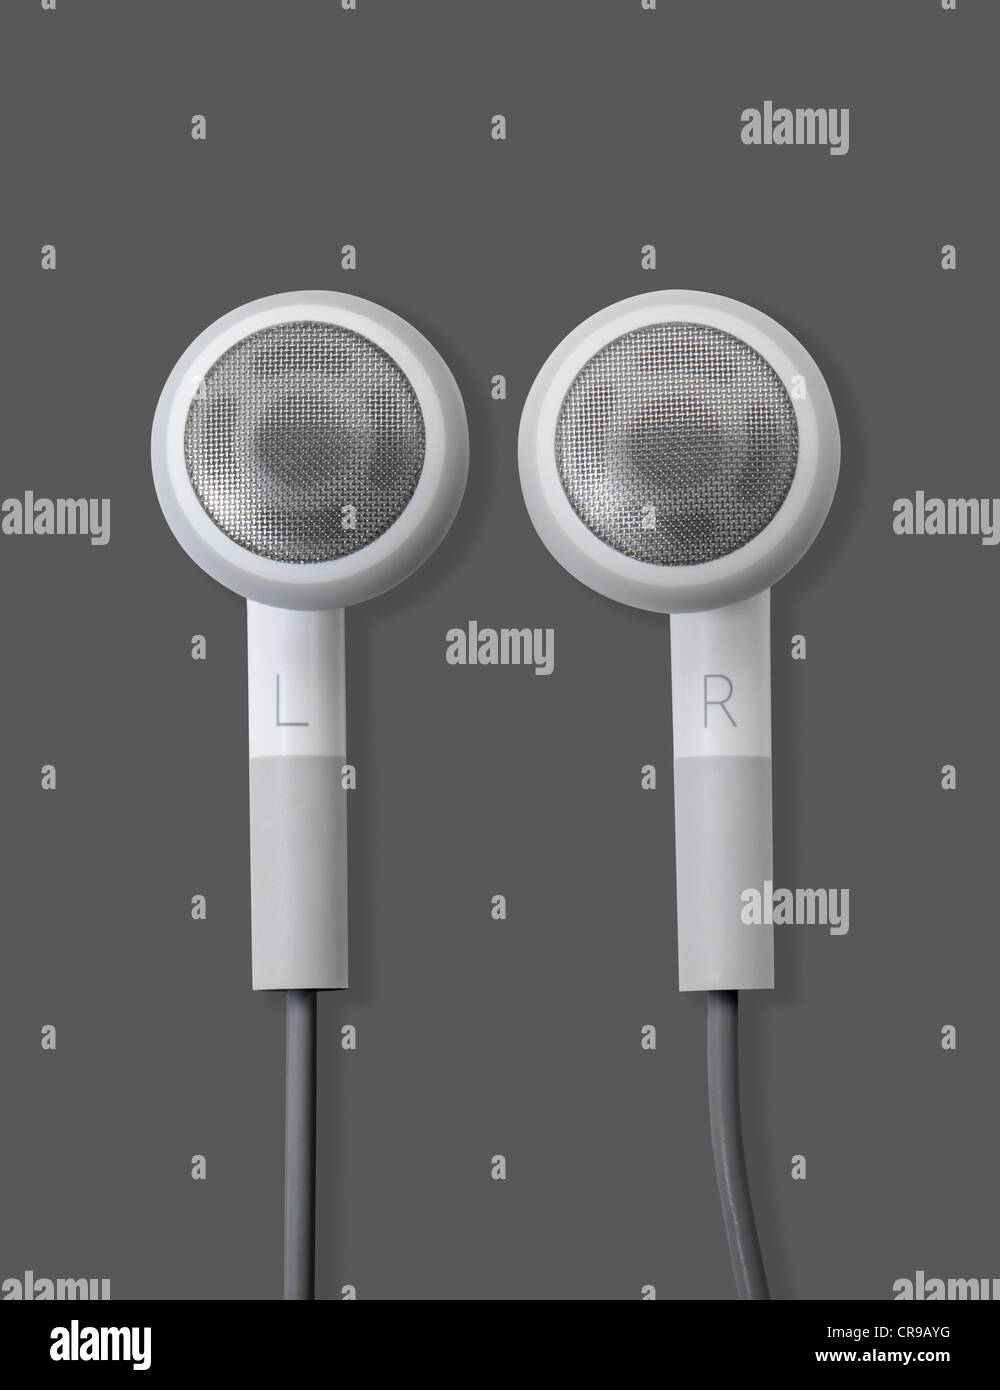 iPhone iPod left and right earphones Stock Photo